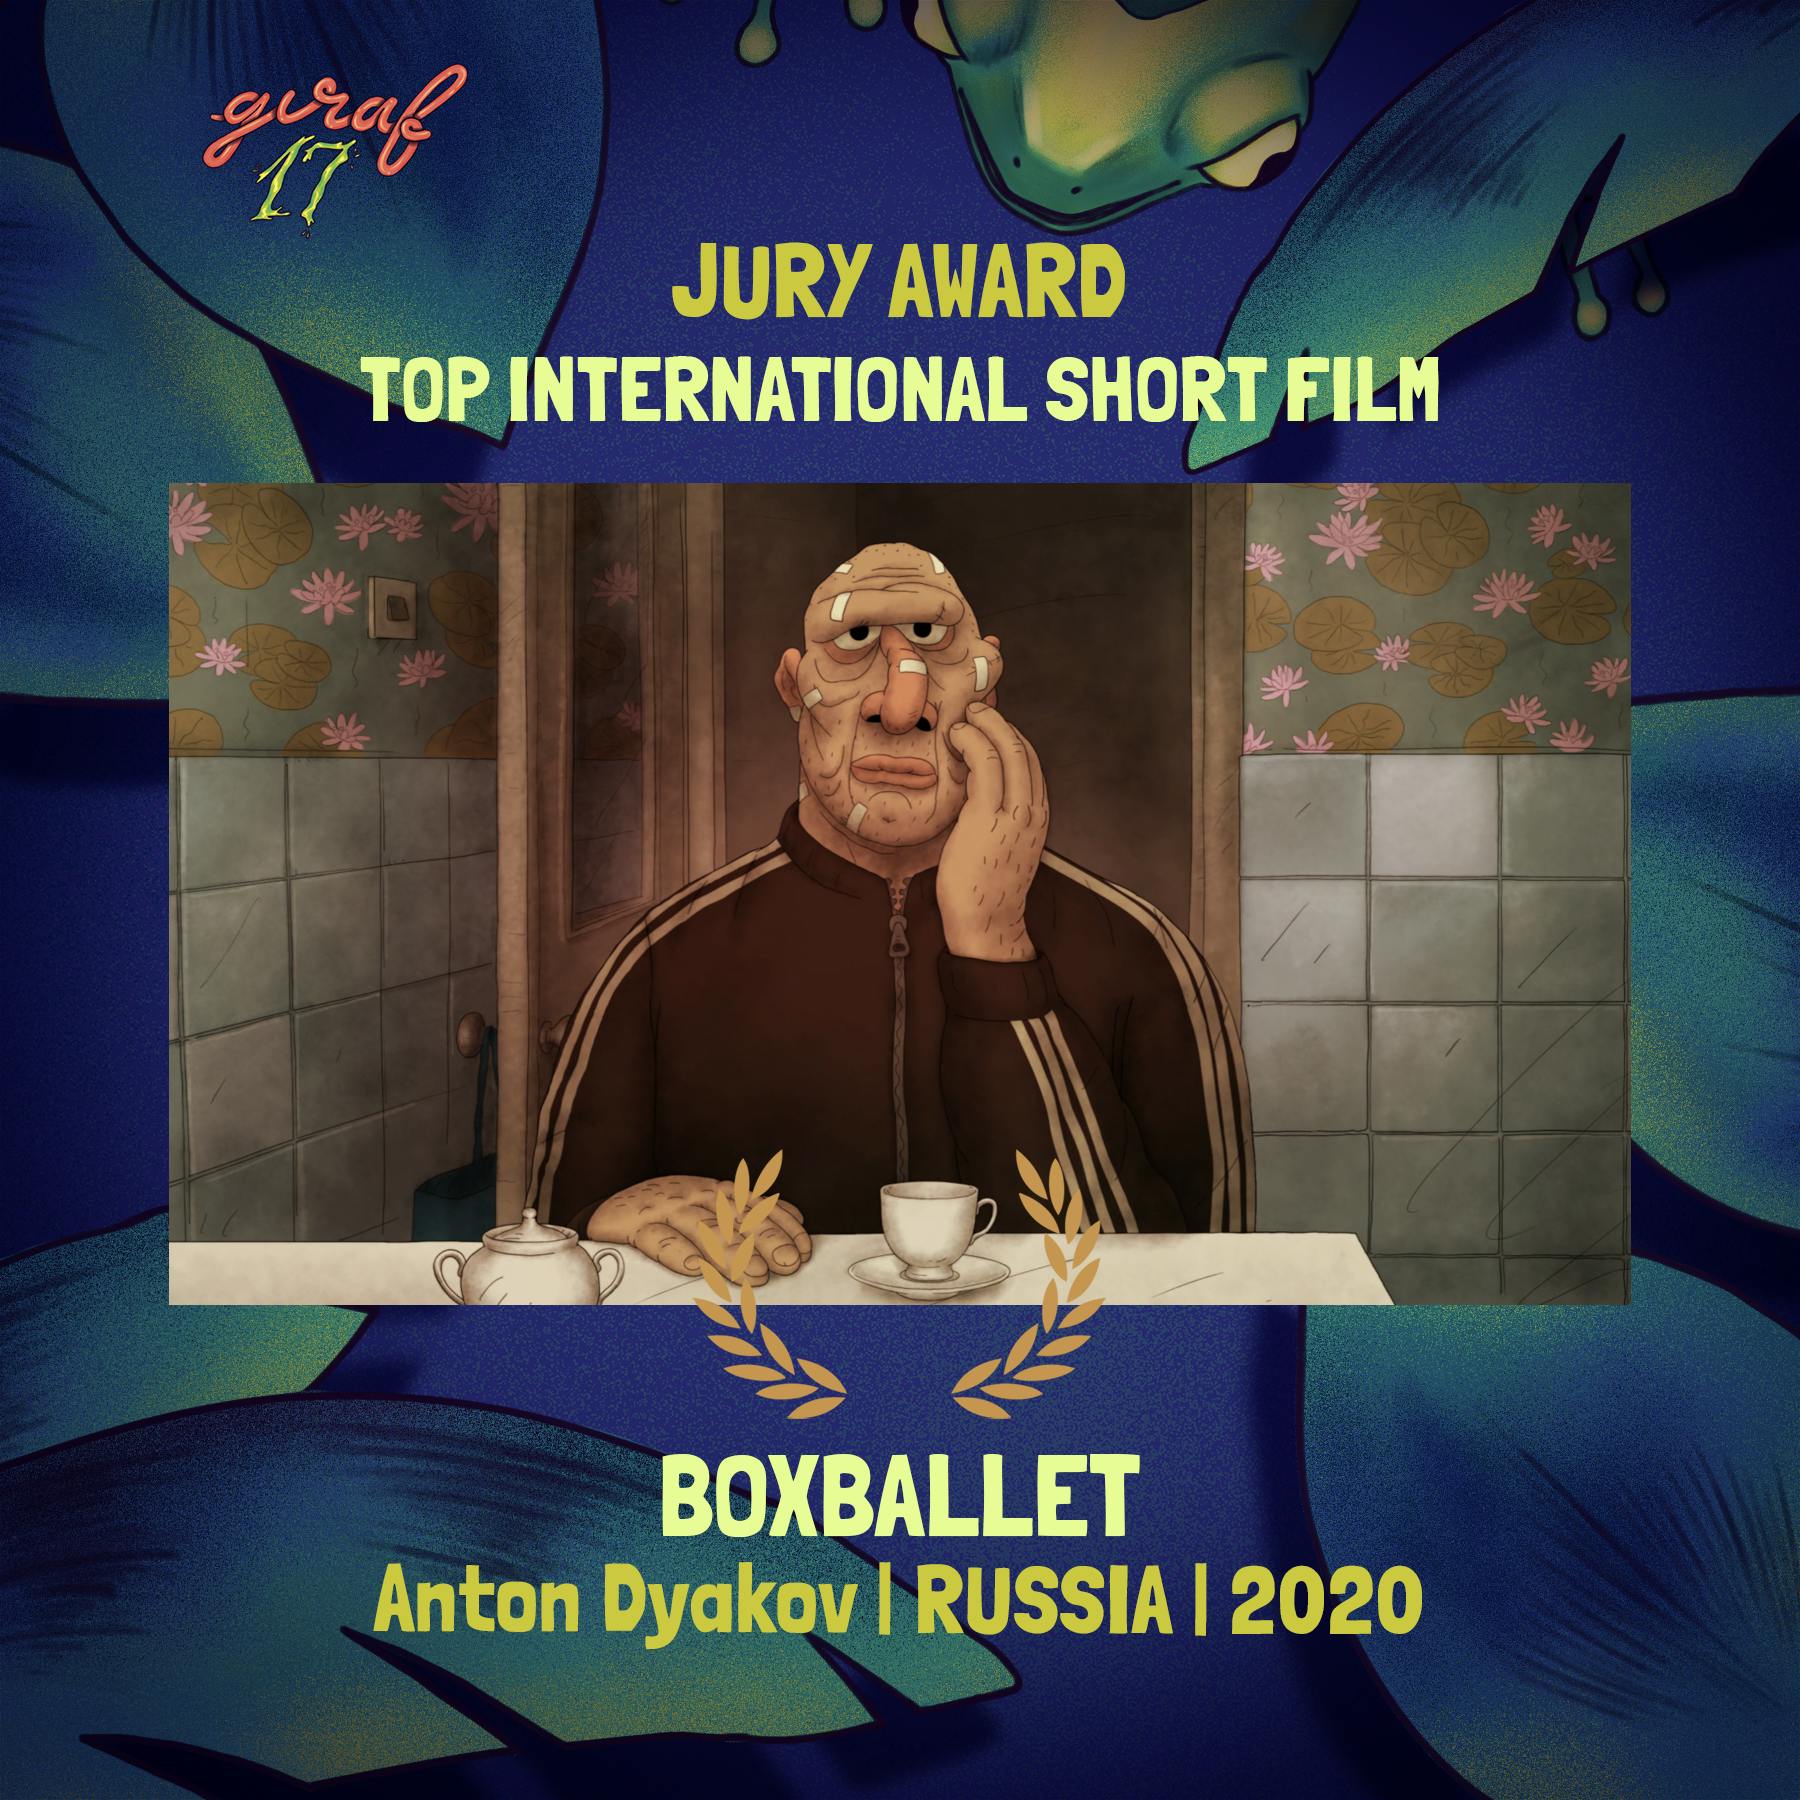 An image of a boxer in a tracksuit with bandages on his face, sitting at a table with a tea cup. Text: Jury Award, Top International Short Film, Boxballet, Anton Dyakov, Russia, 2020